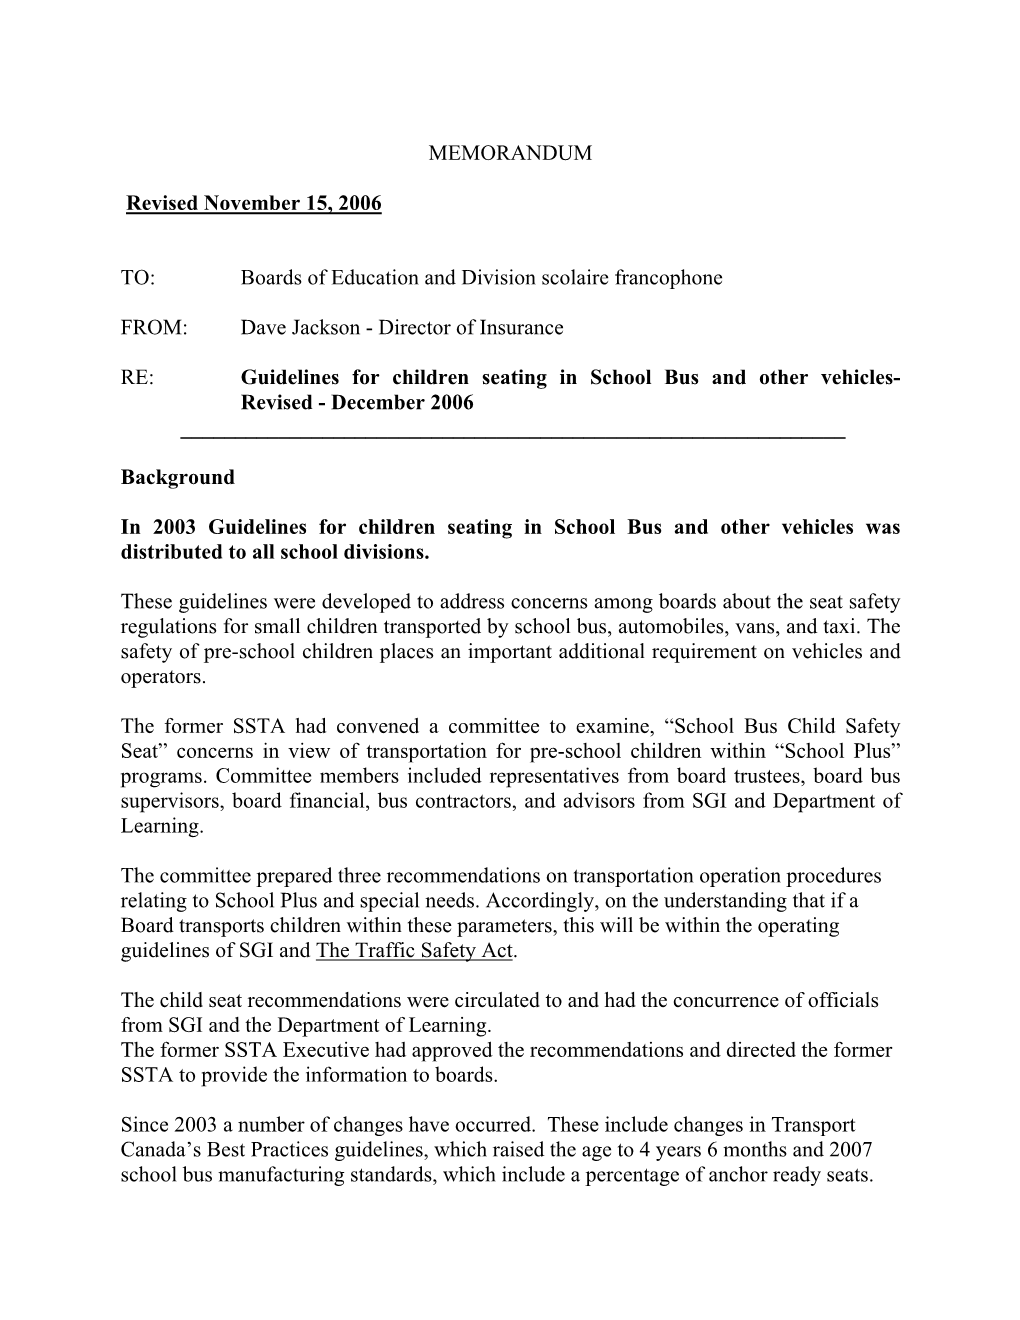 Guidelines for Children Seating in School Bus and Other Vehicles- Revised - December 2006 ______